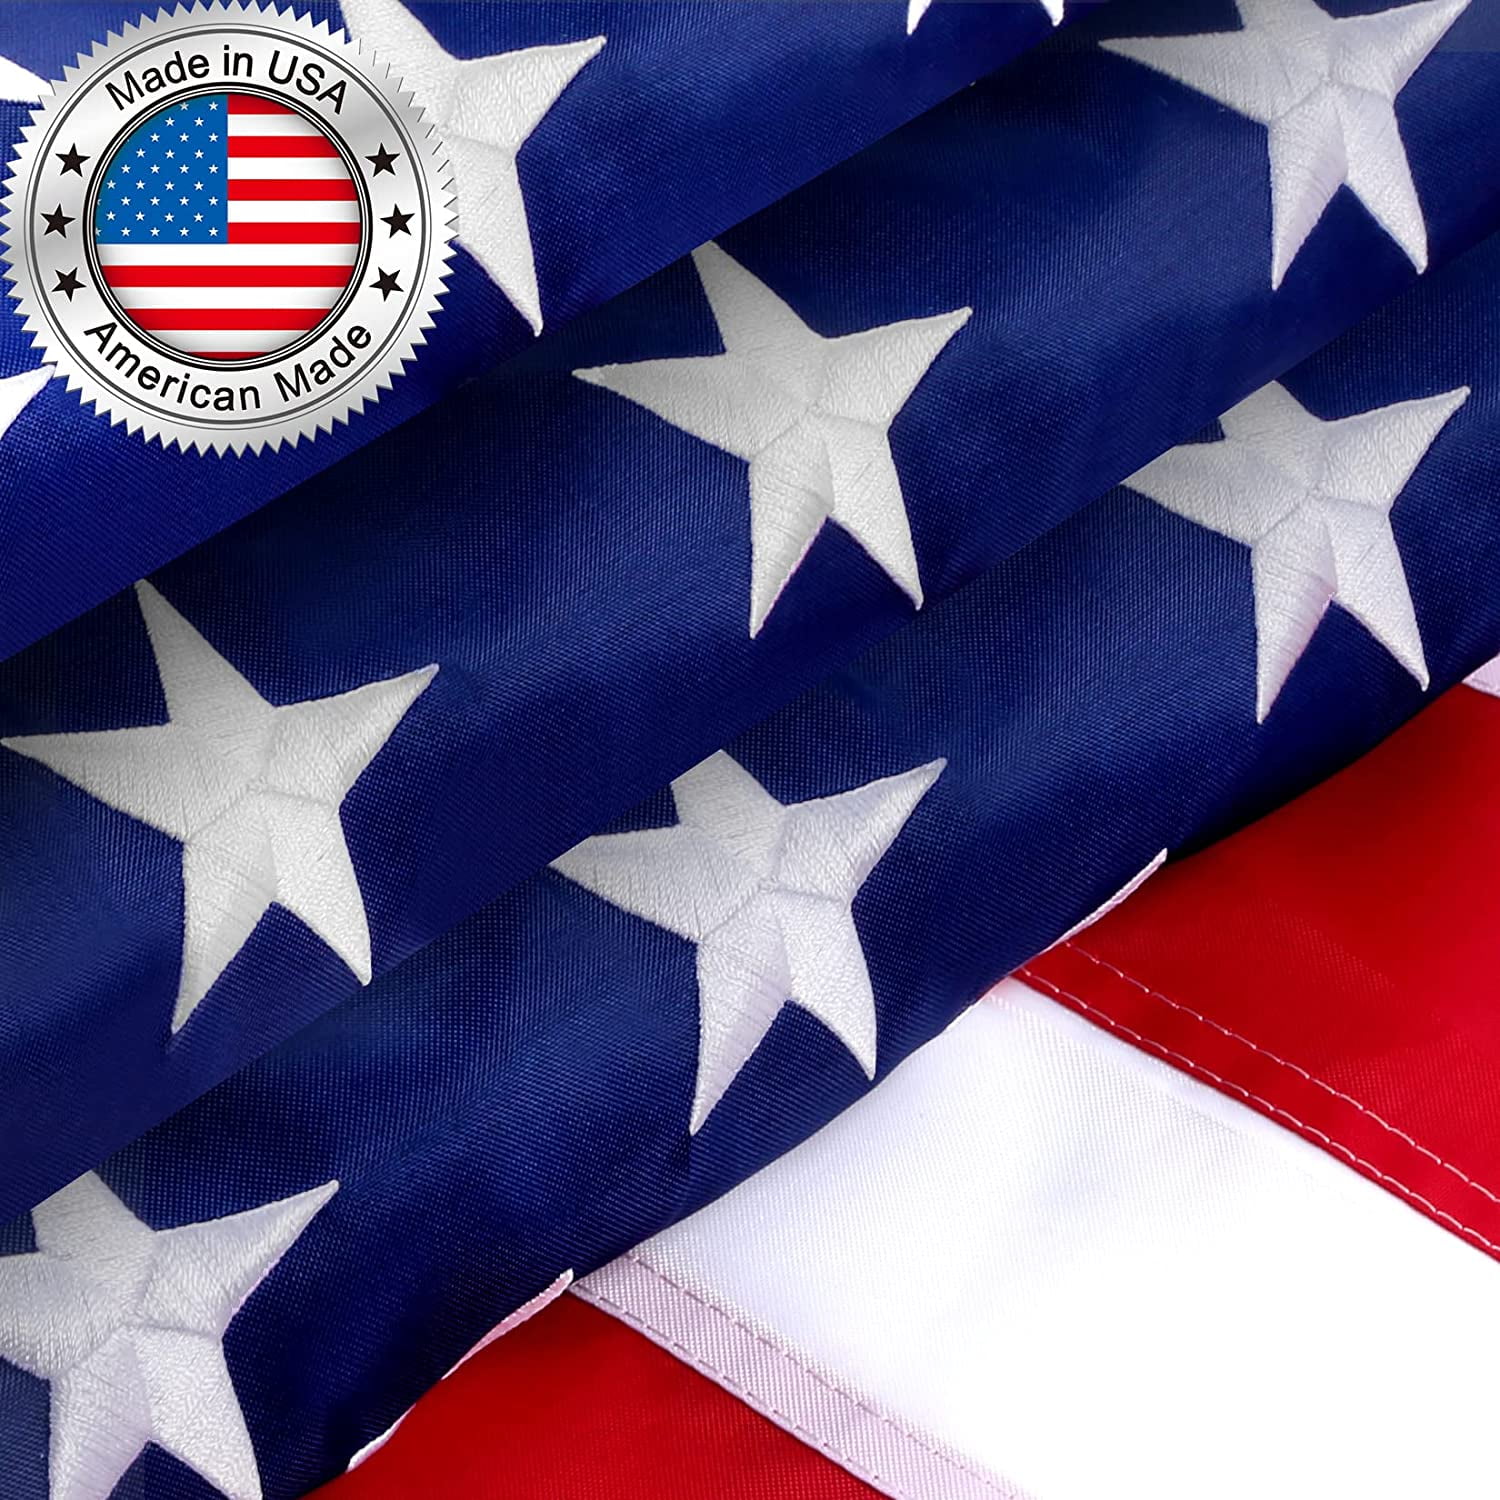 American Flag 3x5 FT Outdoor USA Heavy duty Nylon US Flags w/ Embroidered Stars 